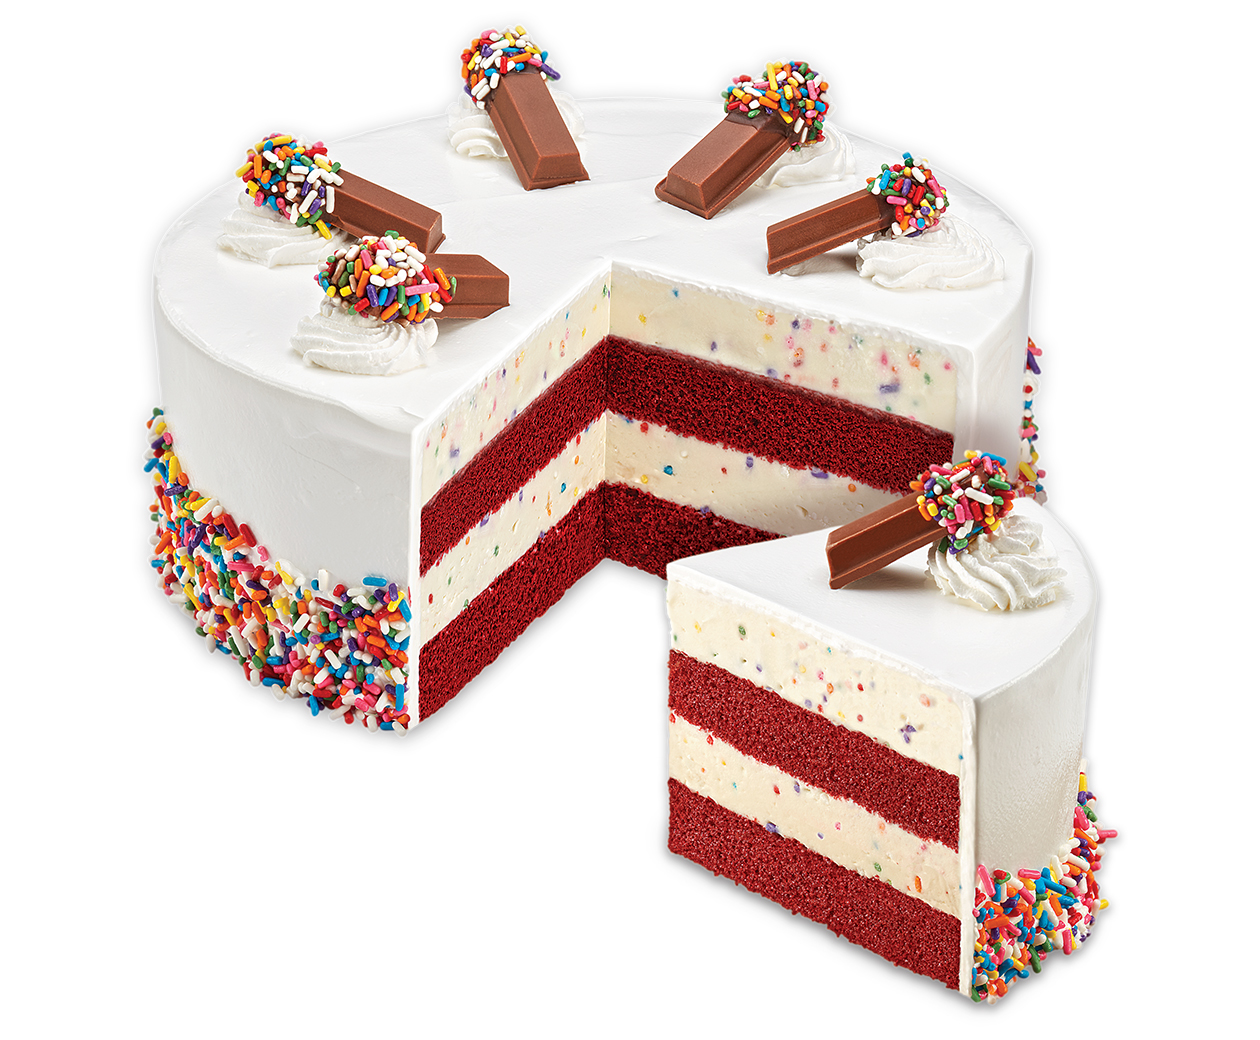 Cakes Made With Your Favorite Ice Cream At Cold Stone Creamery - dq blizzard cake roblox